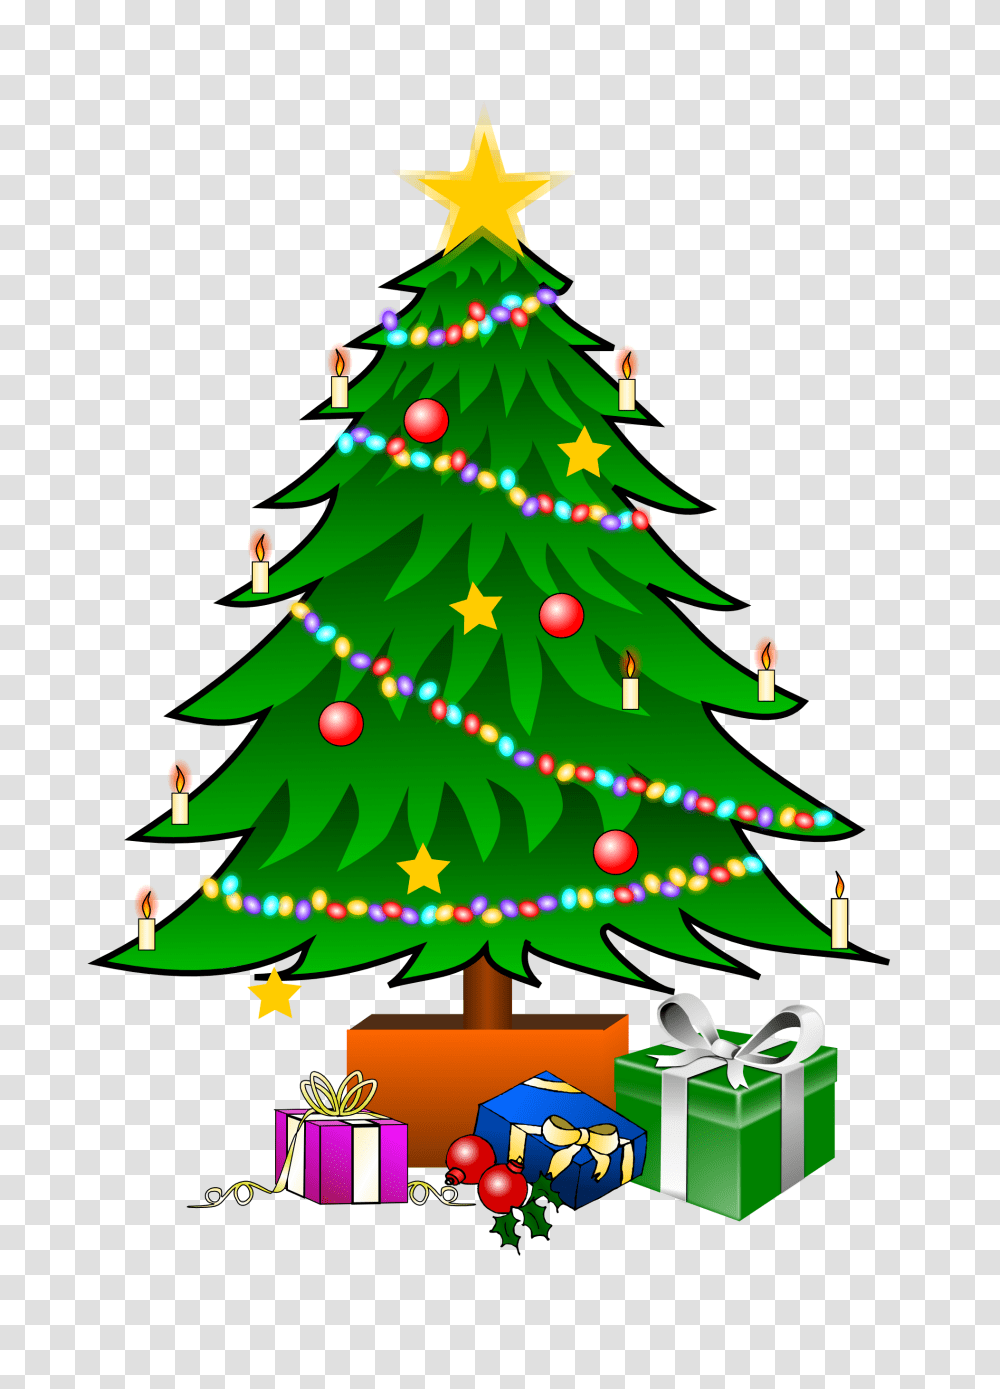 Christmas Tree Clip Art Is A Fun Way To Add One Of The Most, Ornament, Plant, Star Symbol Transparent Png